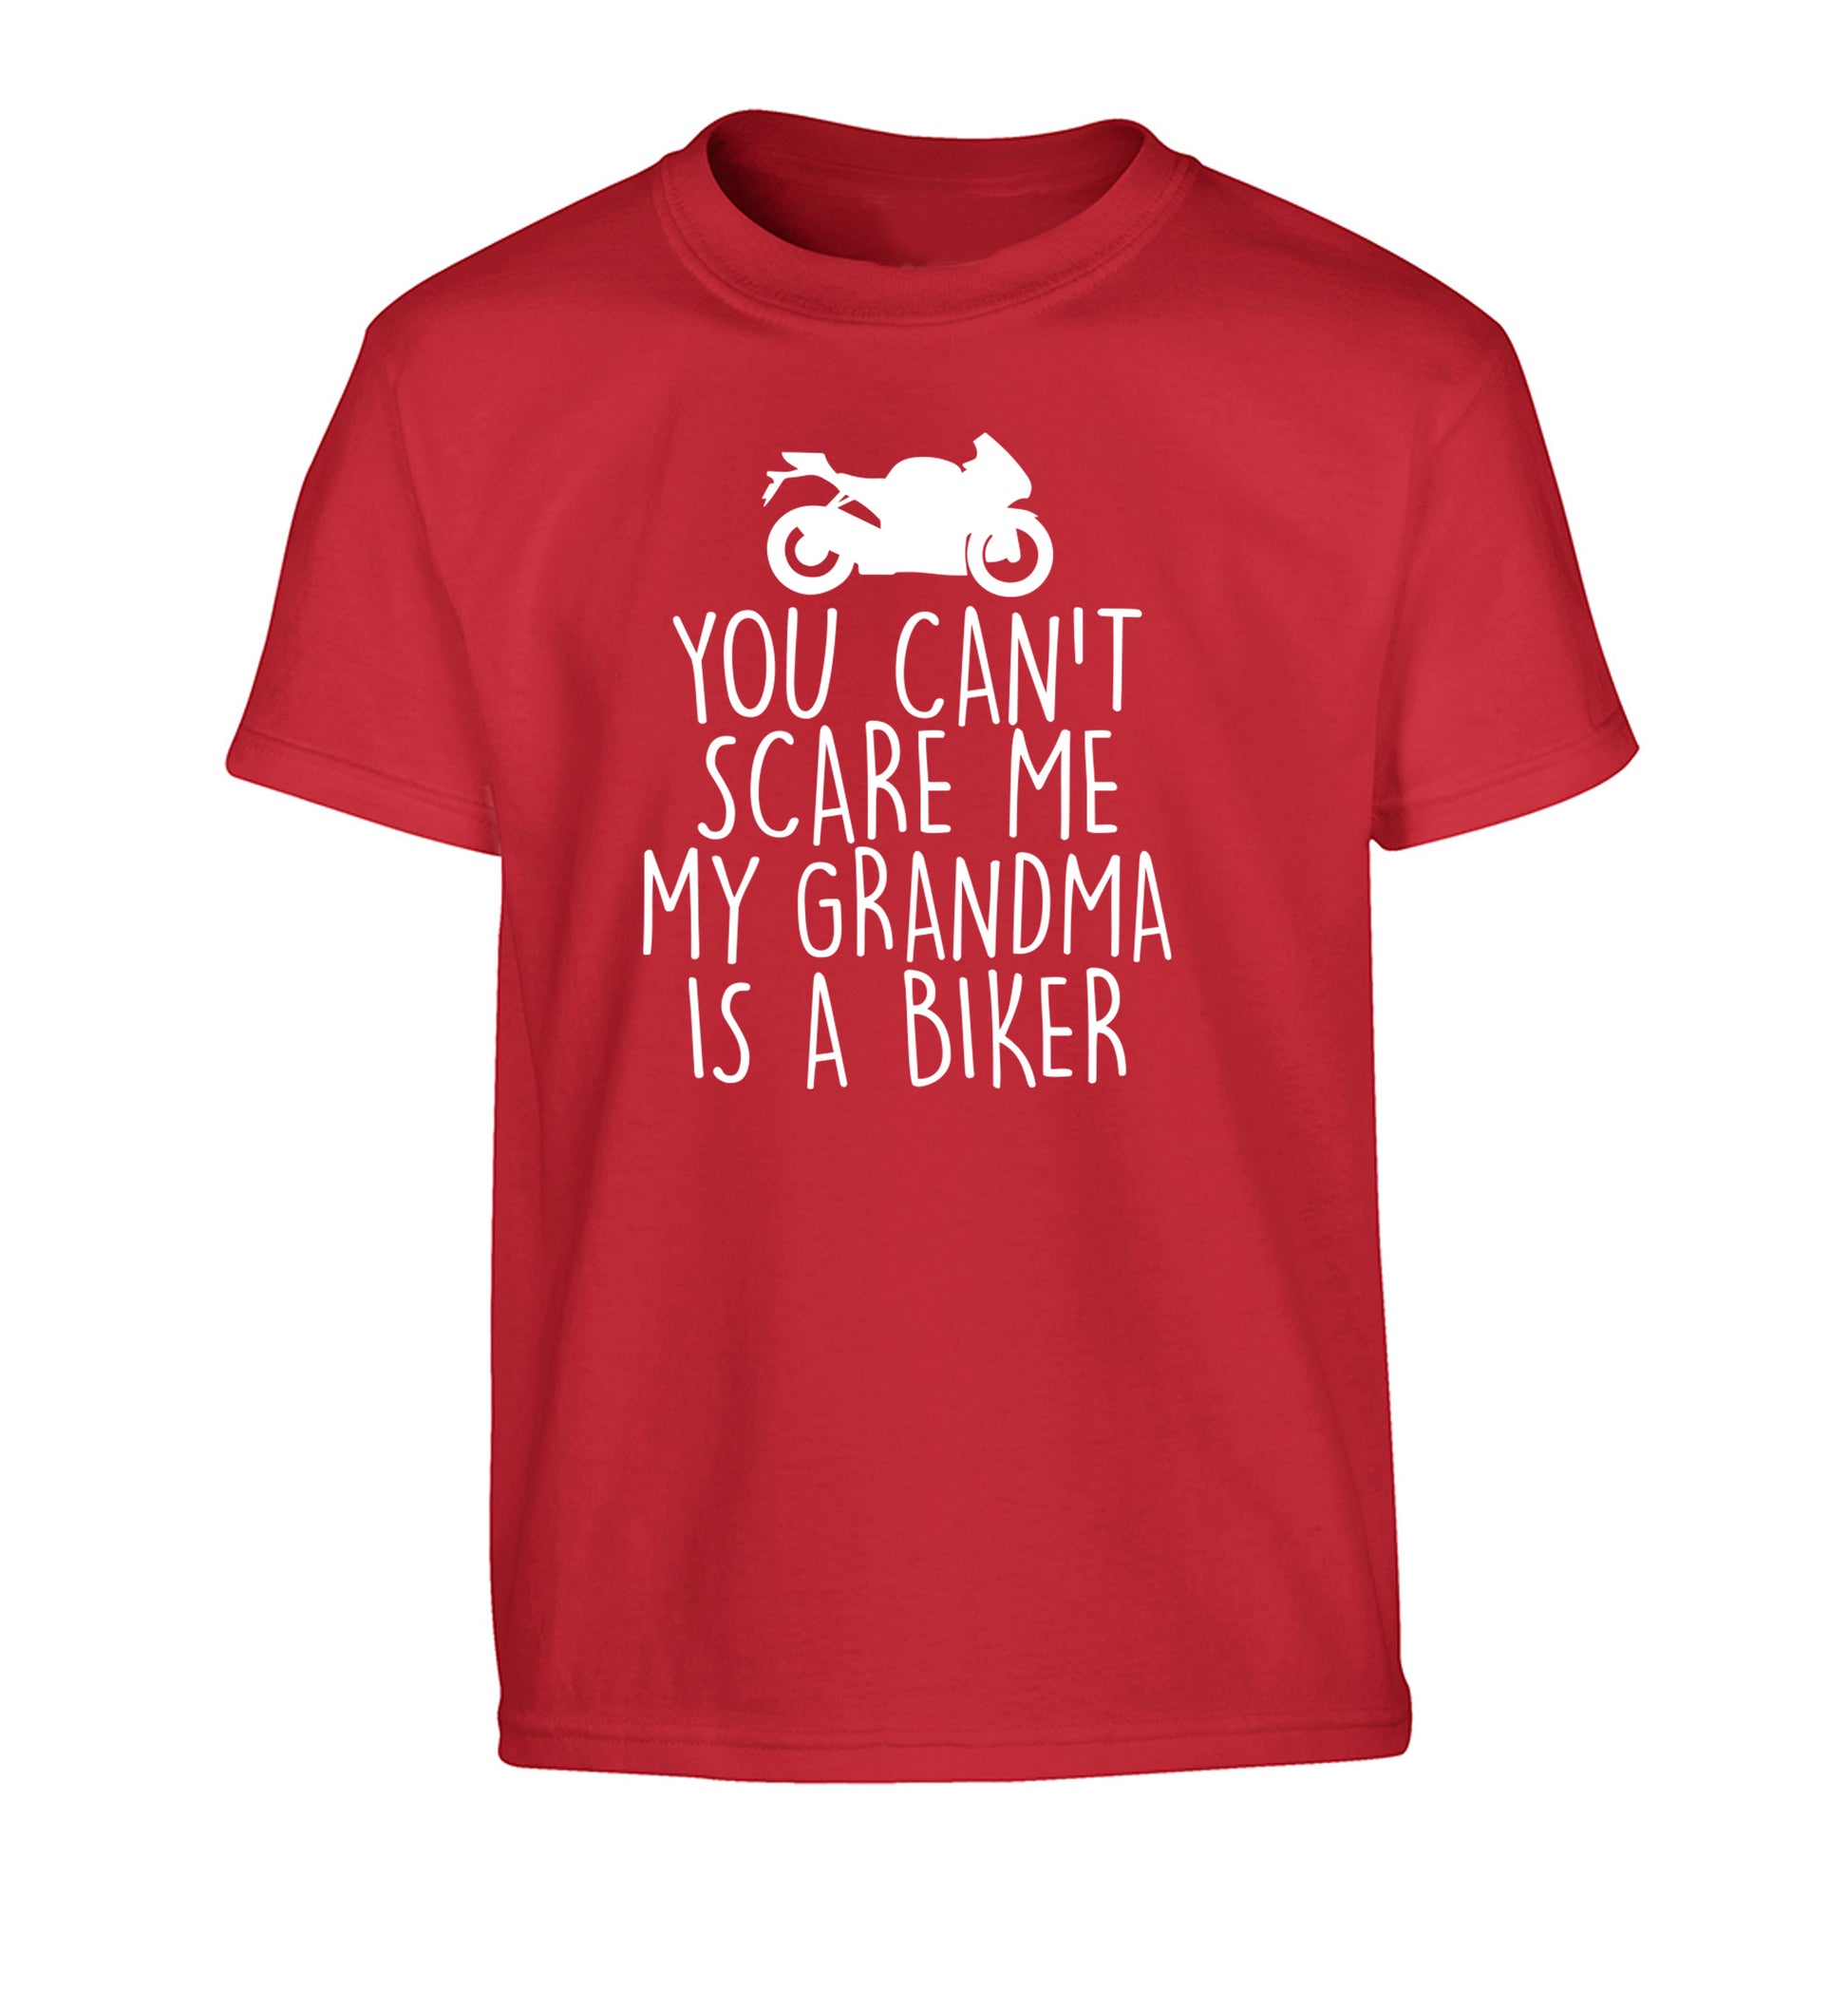 You can't scare me my grandma is a biker Children's red Tshirt 12-13 Years